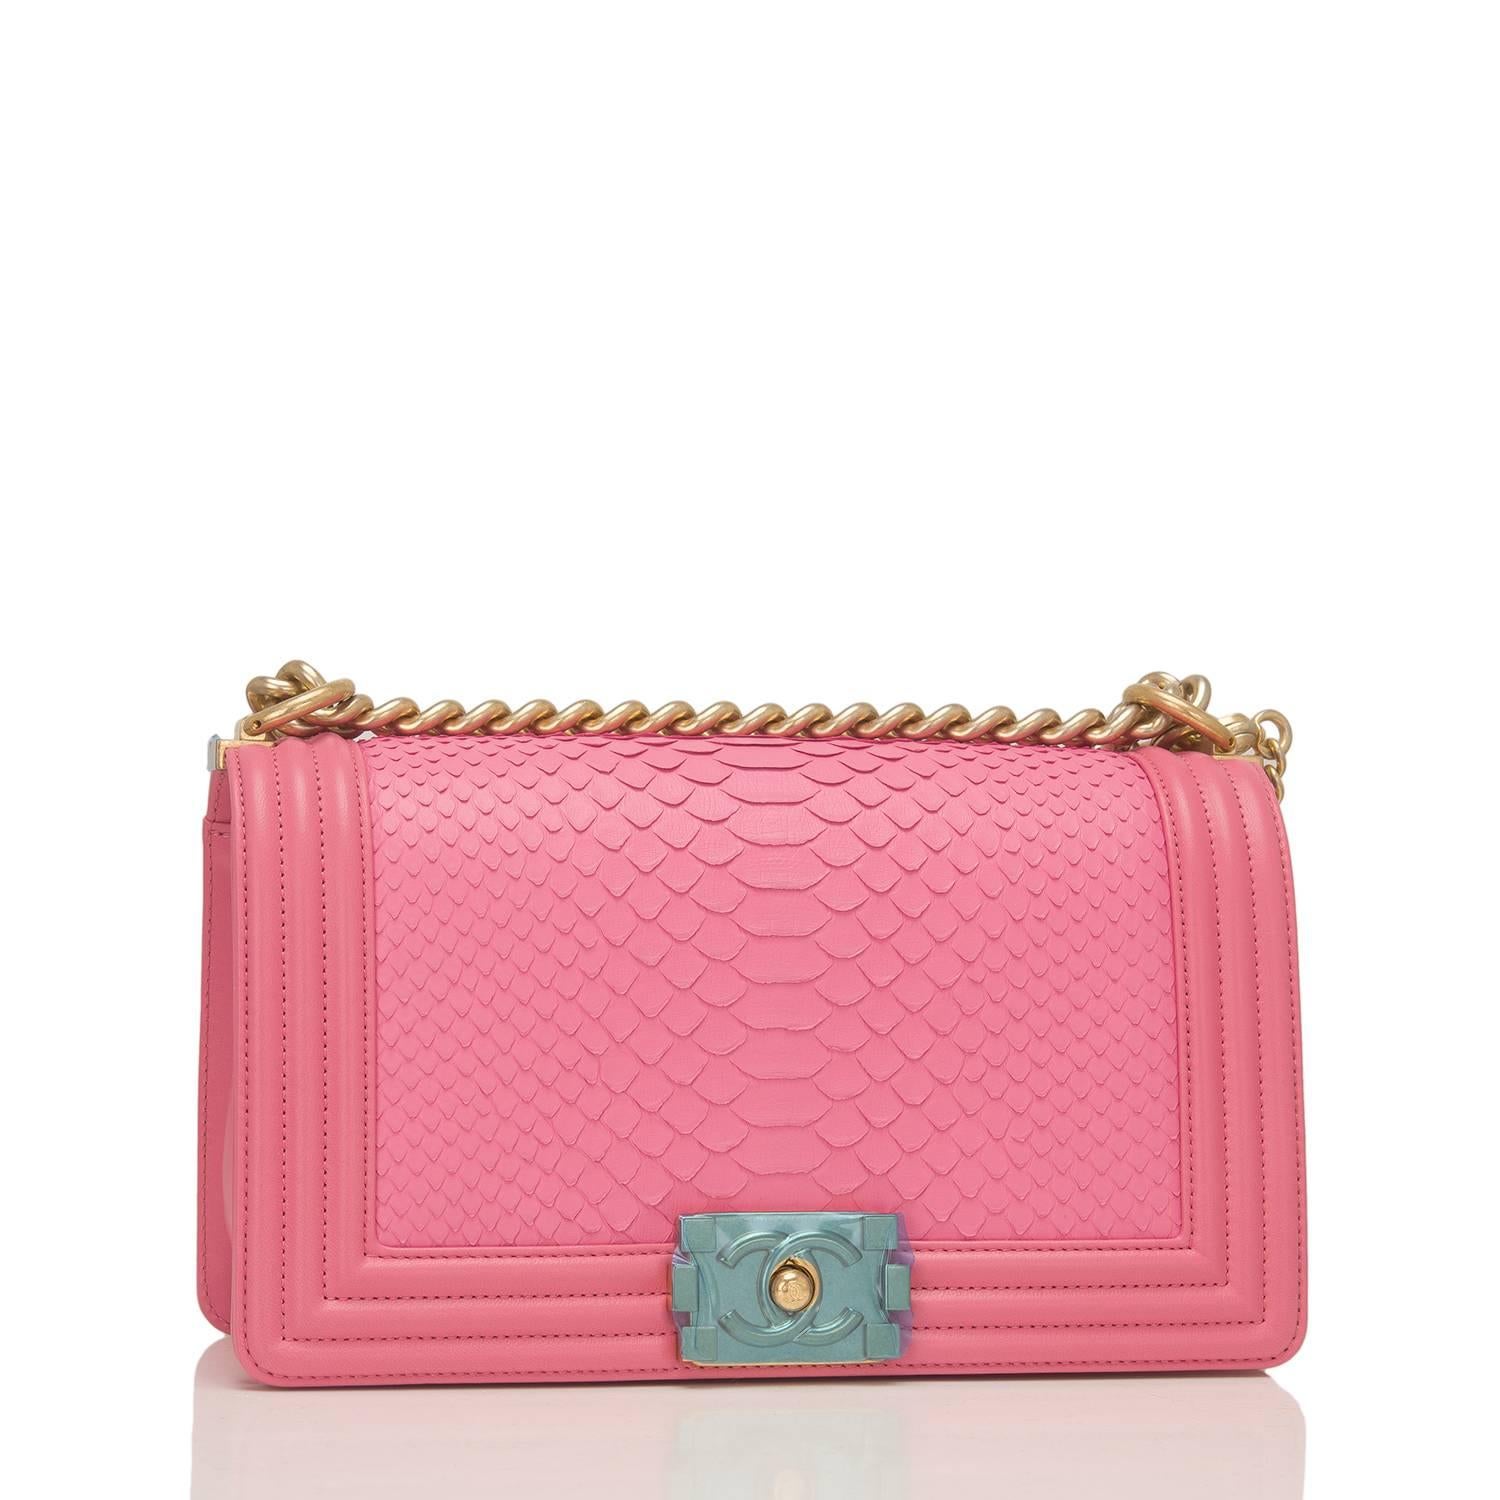 Chanel Medium Boy bag of pink python and gold tone hardware.

This Chanel bag is in the classic Boy style with a full front flap with the Boy signature CC push lock closure detail, lambskin leather accents and gold tone chain link with pink leather